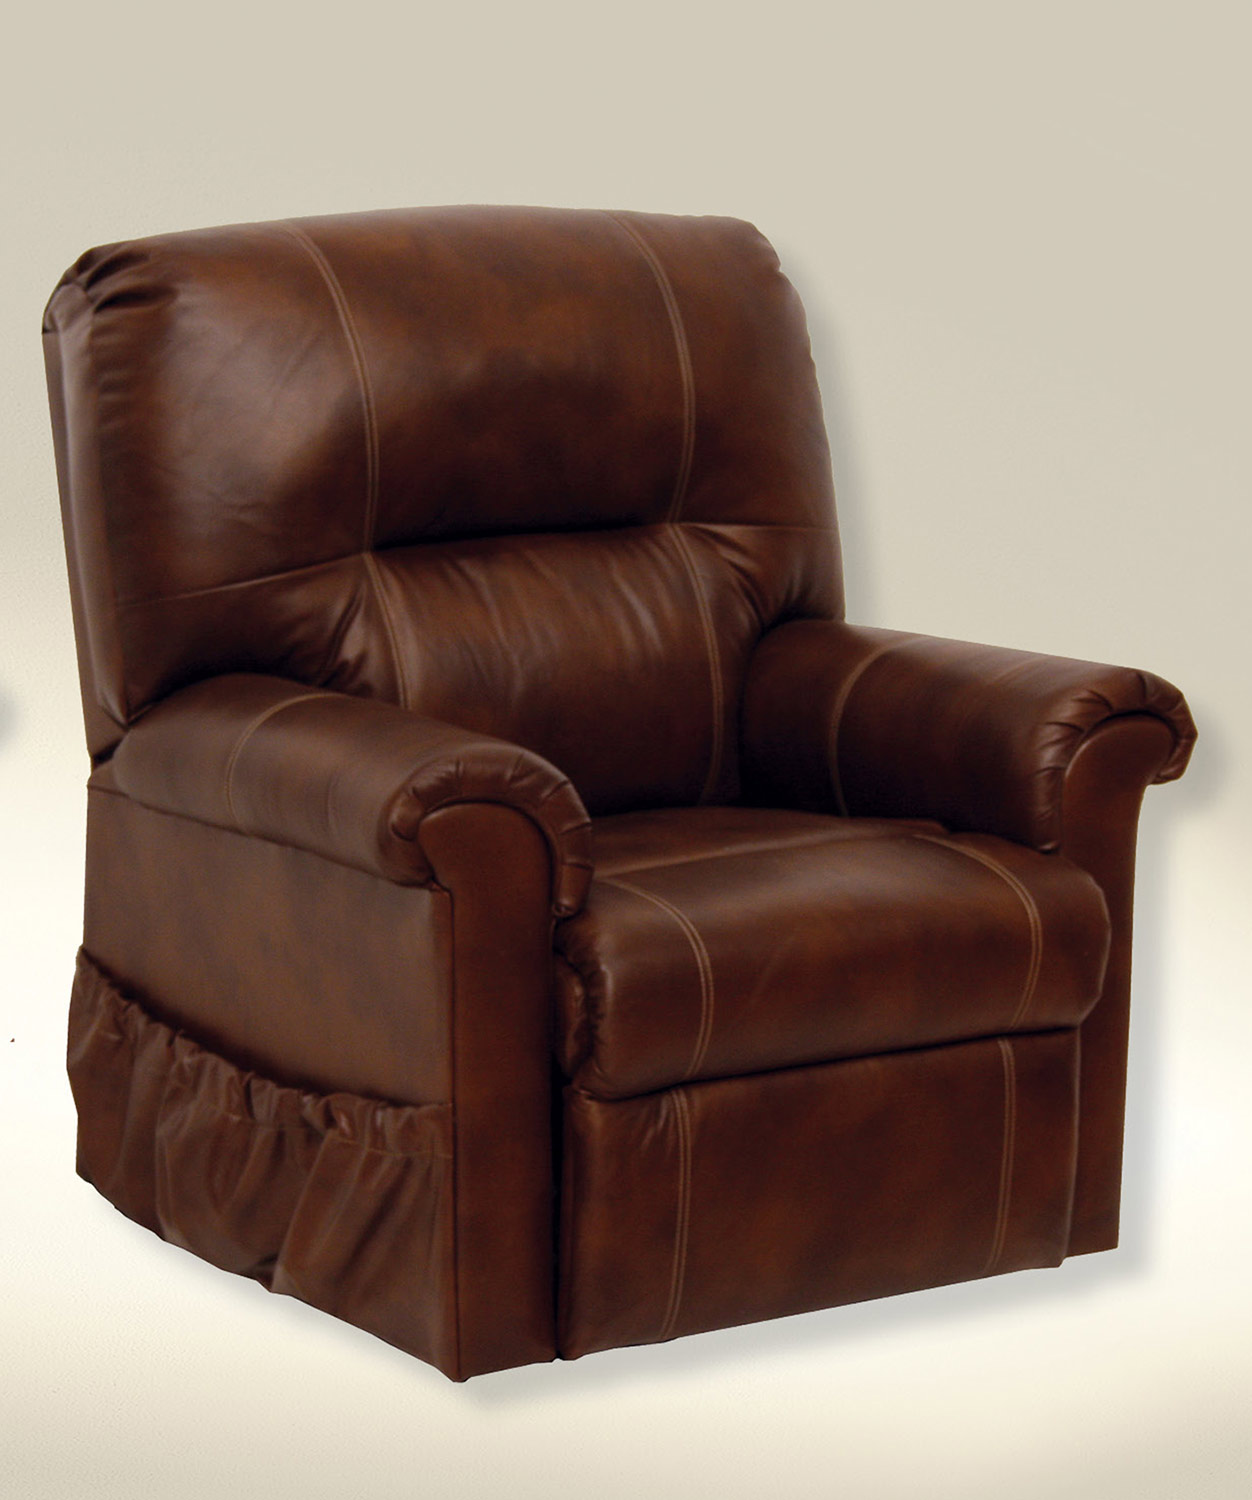 CatNapper Vintage Leather Power Lift Chair - Tobacco